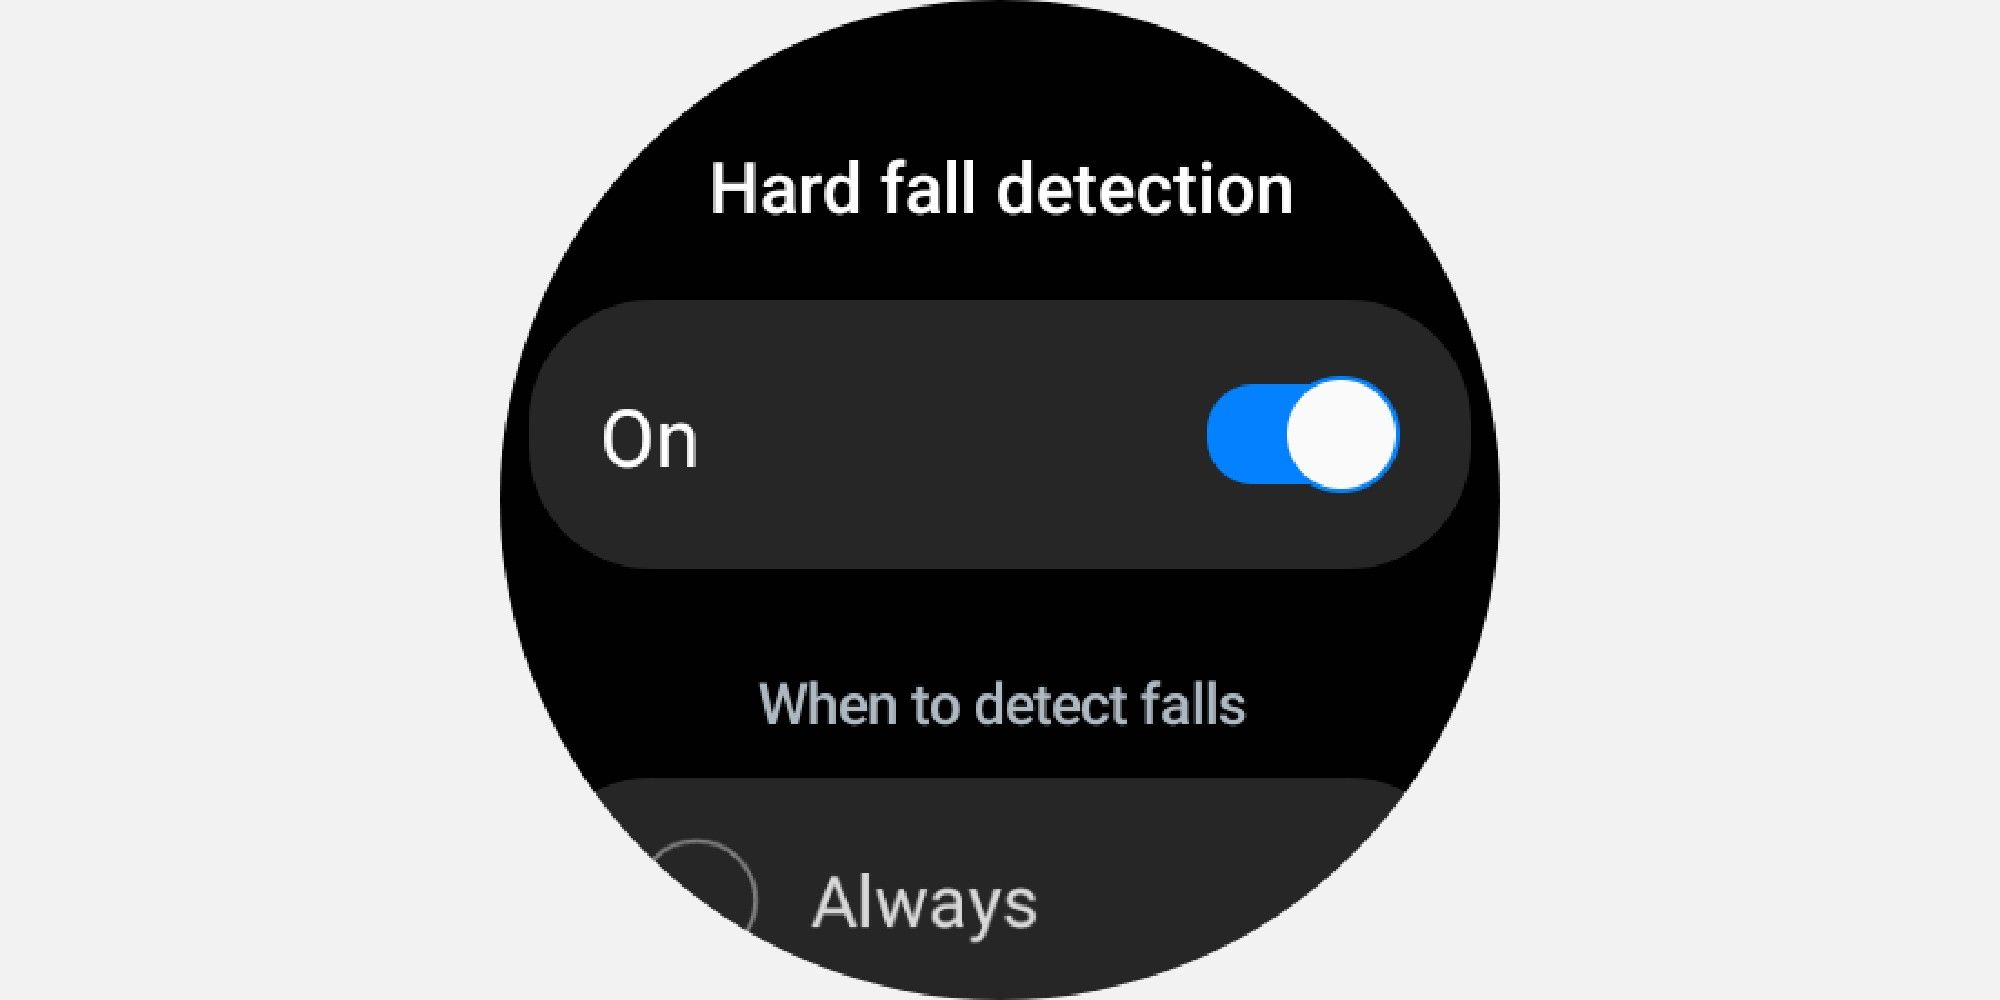 Hard fall detection settings in Samsung